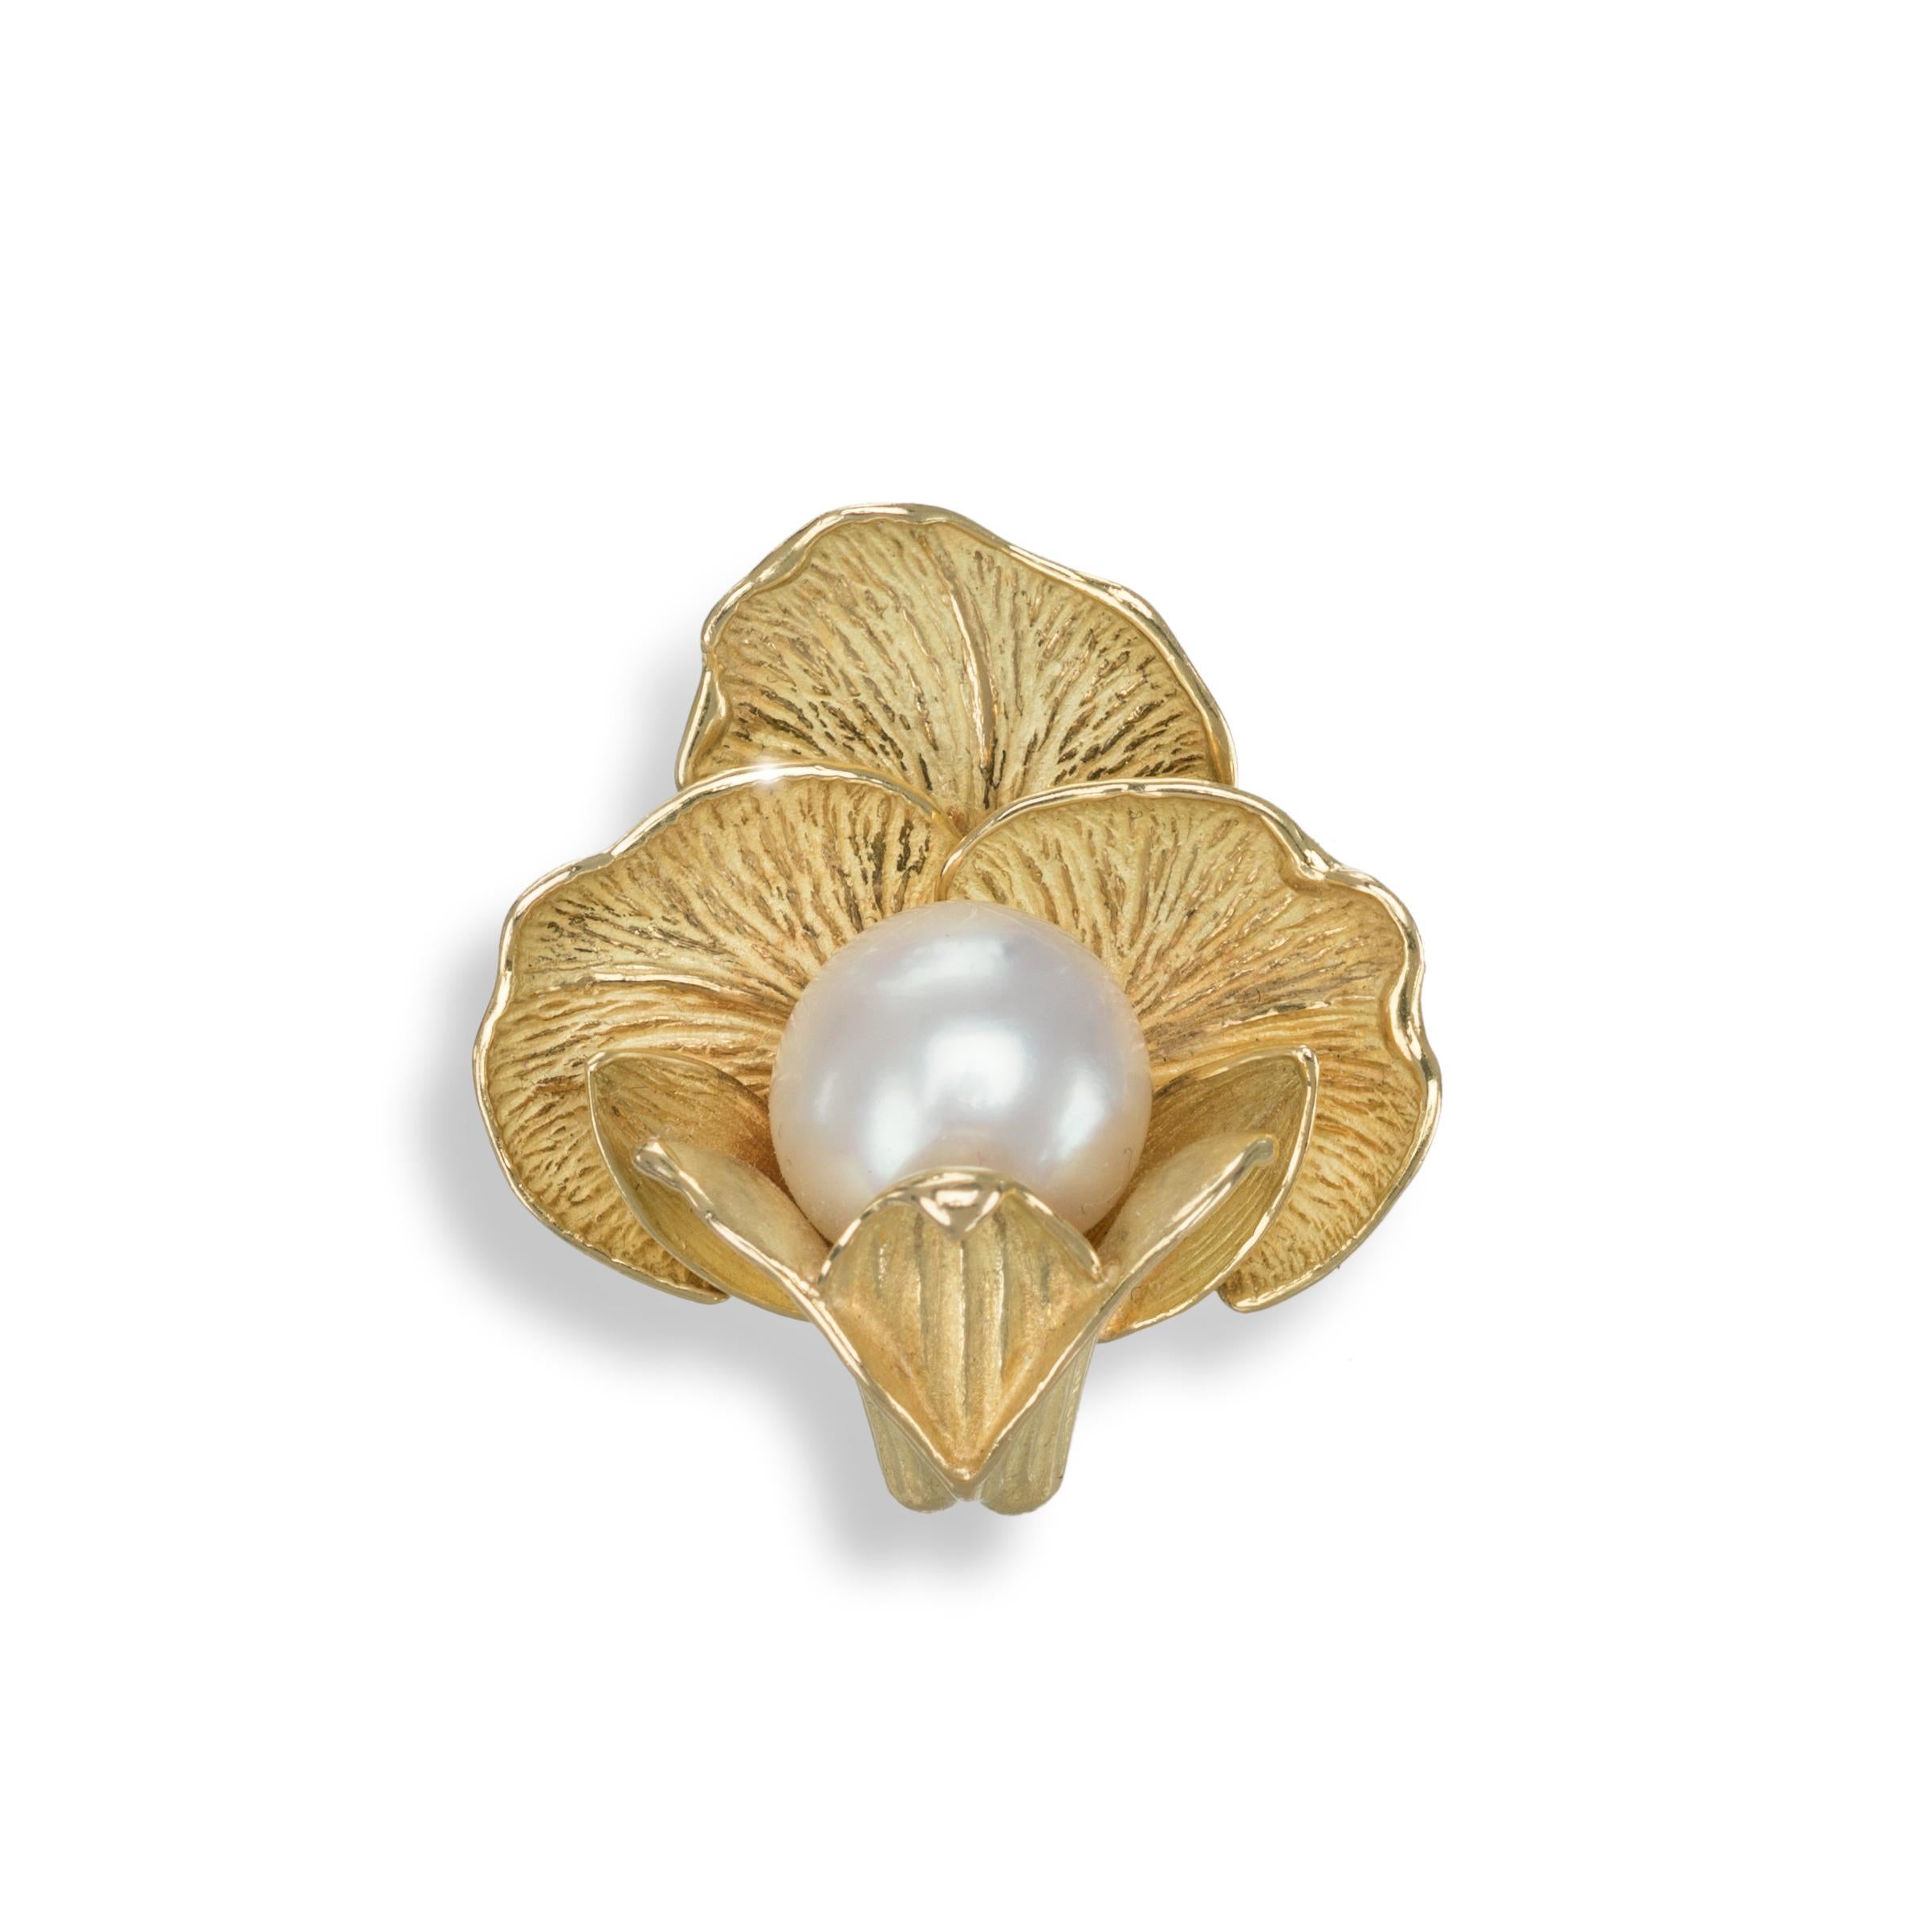 This 18k yellow gold masterpiece is from the Nature inspired collection and features a fully detailed, hand made Orchid flower in full bloom with a lustrous South Sea pearl in the center.

Material: Yellow Gold

Stone: Pearl

Weight: South Sea Pearl